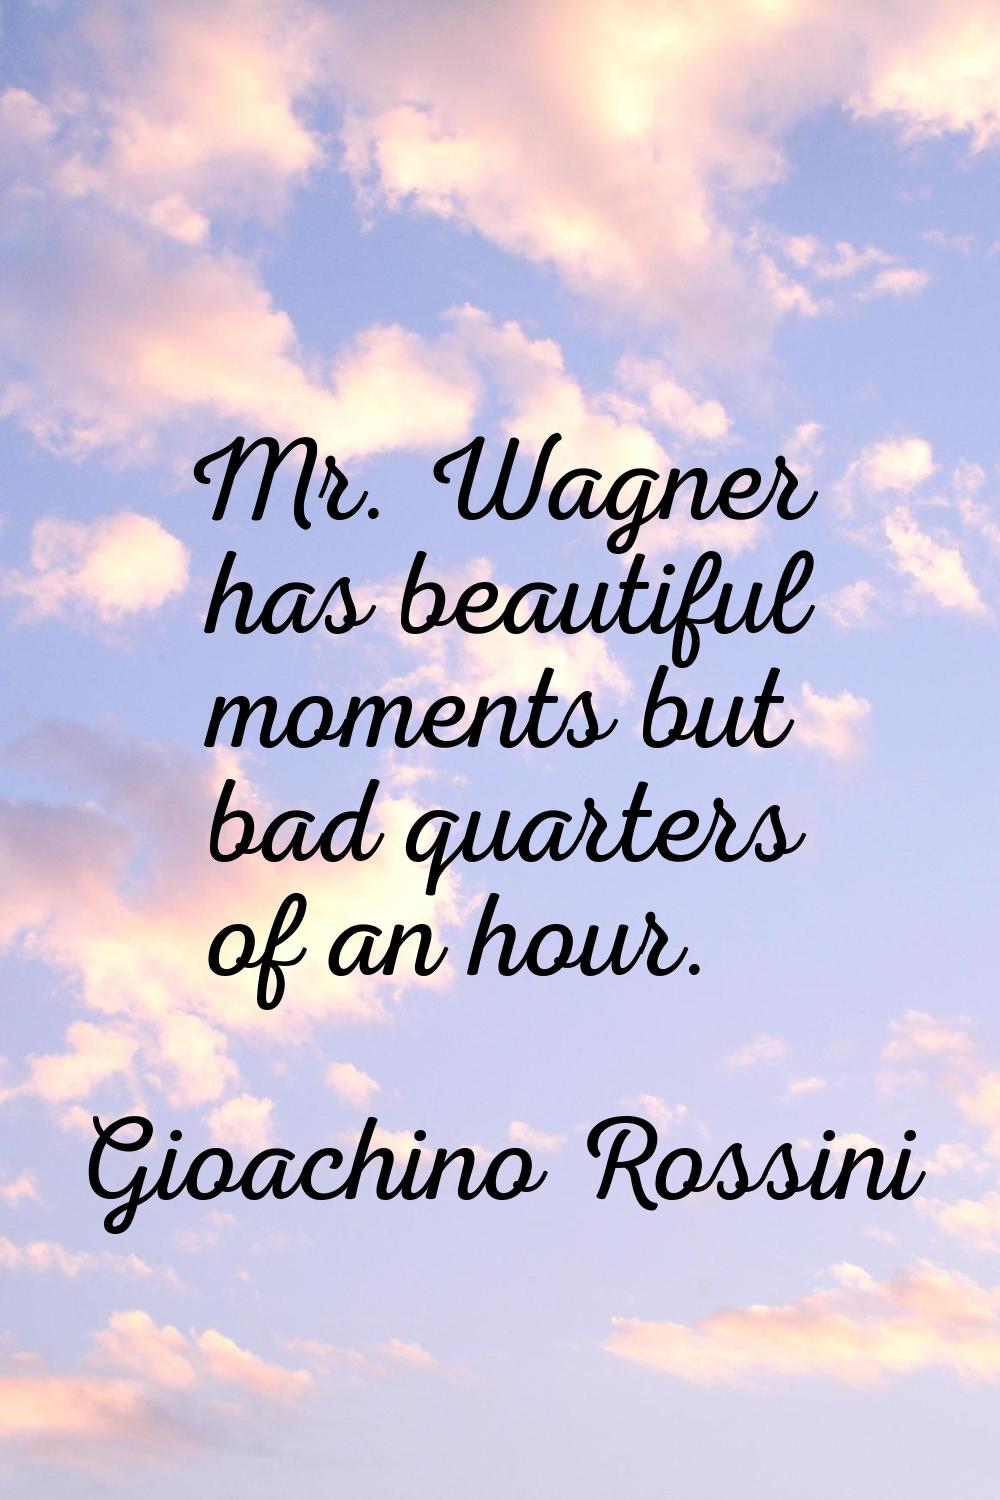 Mr. Wagner has beautiful moments but bad quarters of an hour.